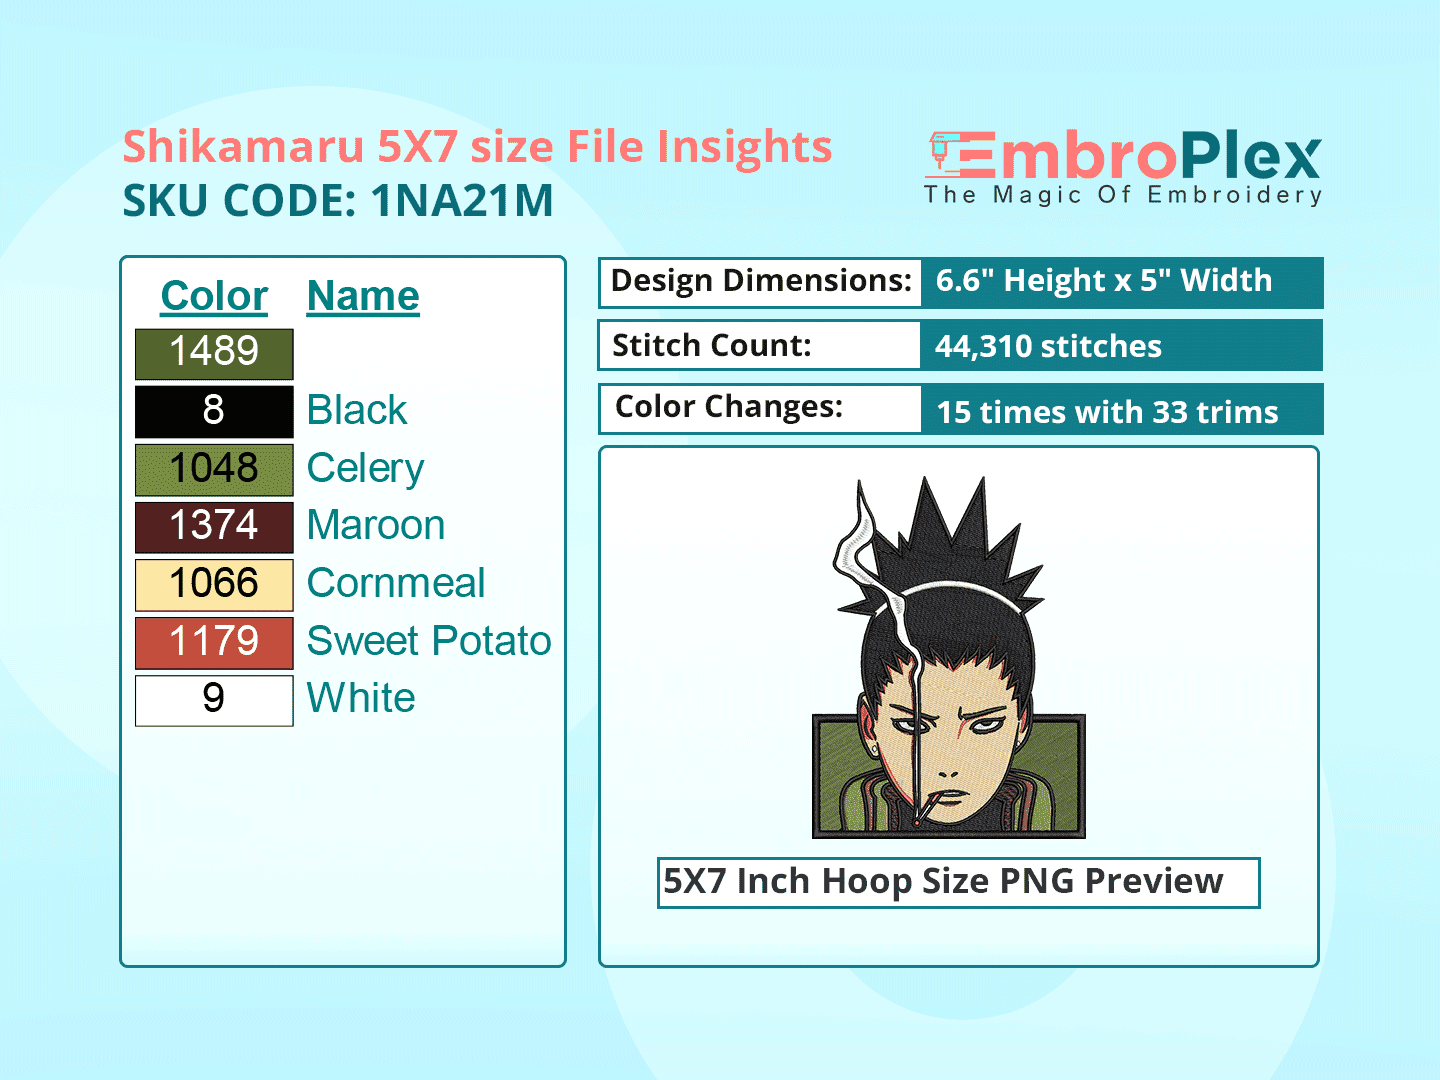 Anime-Inspired  Shikamaru Nara Embroidery Design File - 5x7 Inch hoop Size Variation overview image